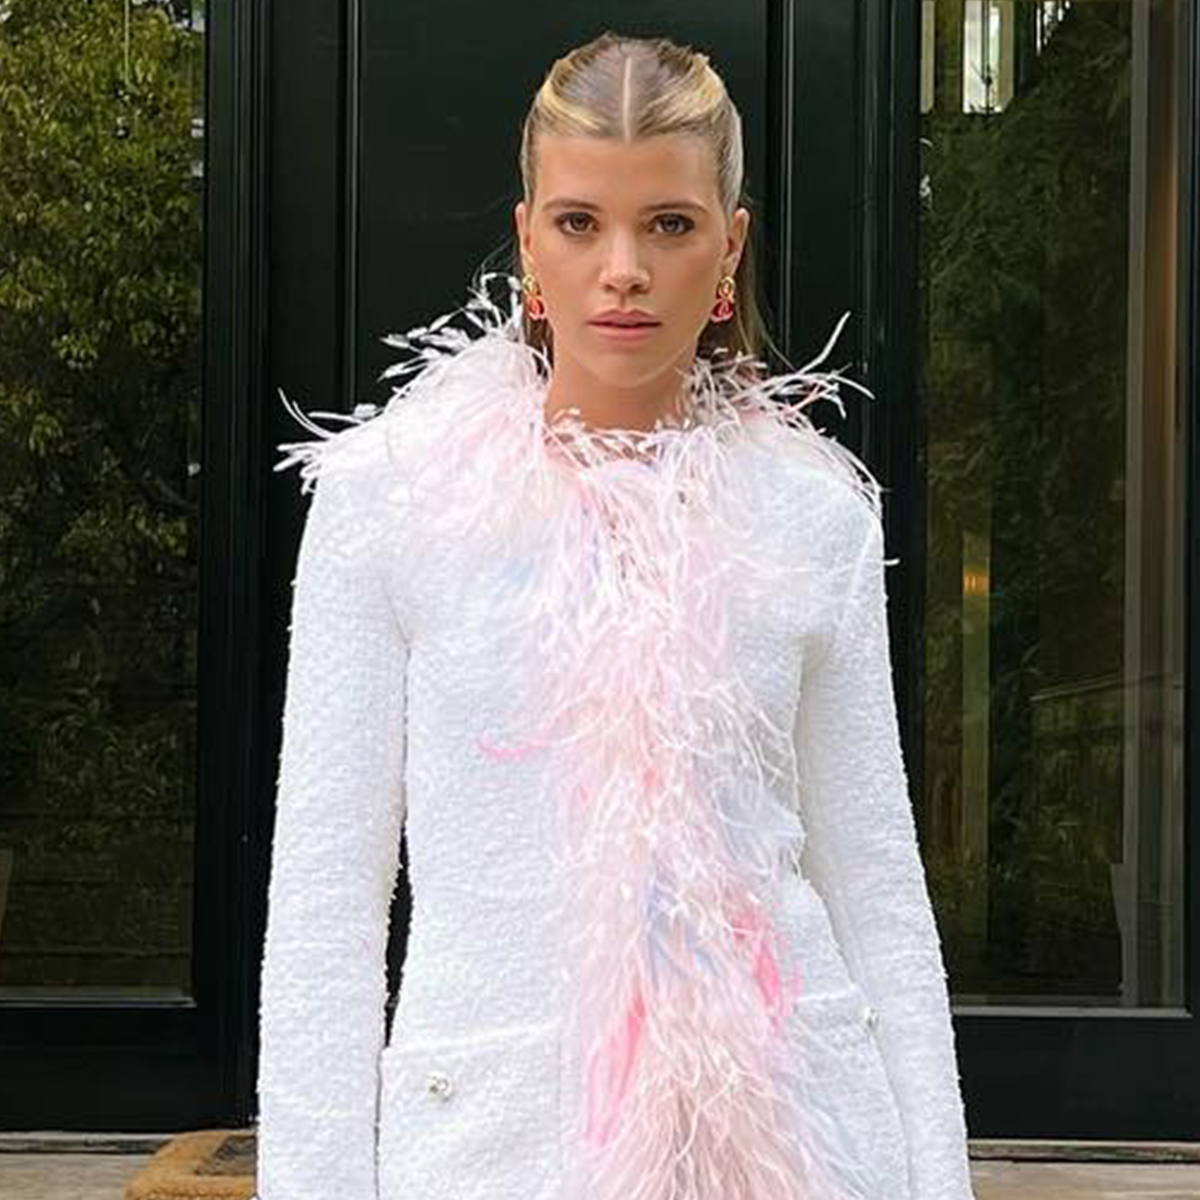 Sofia Richie Proves She’s Still in Bridal Mode With All-White Look